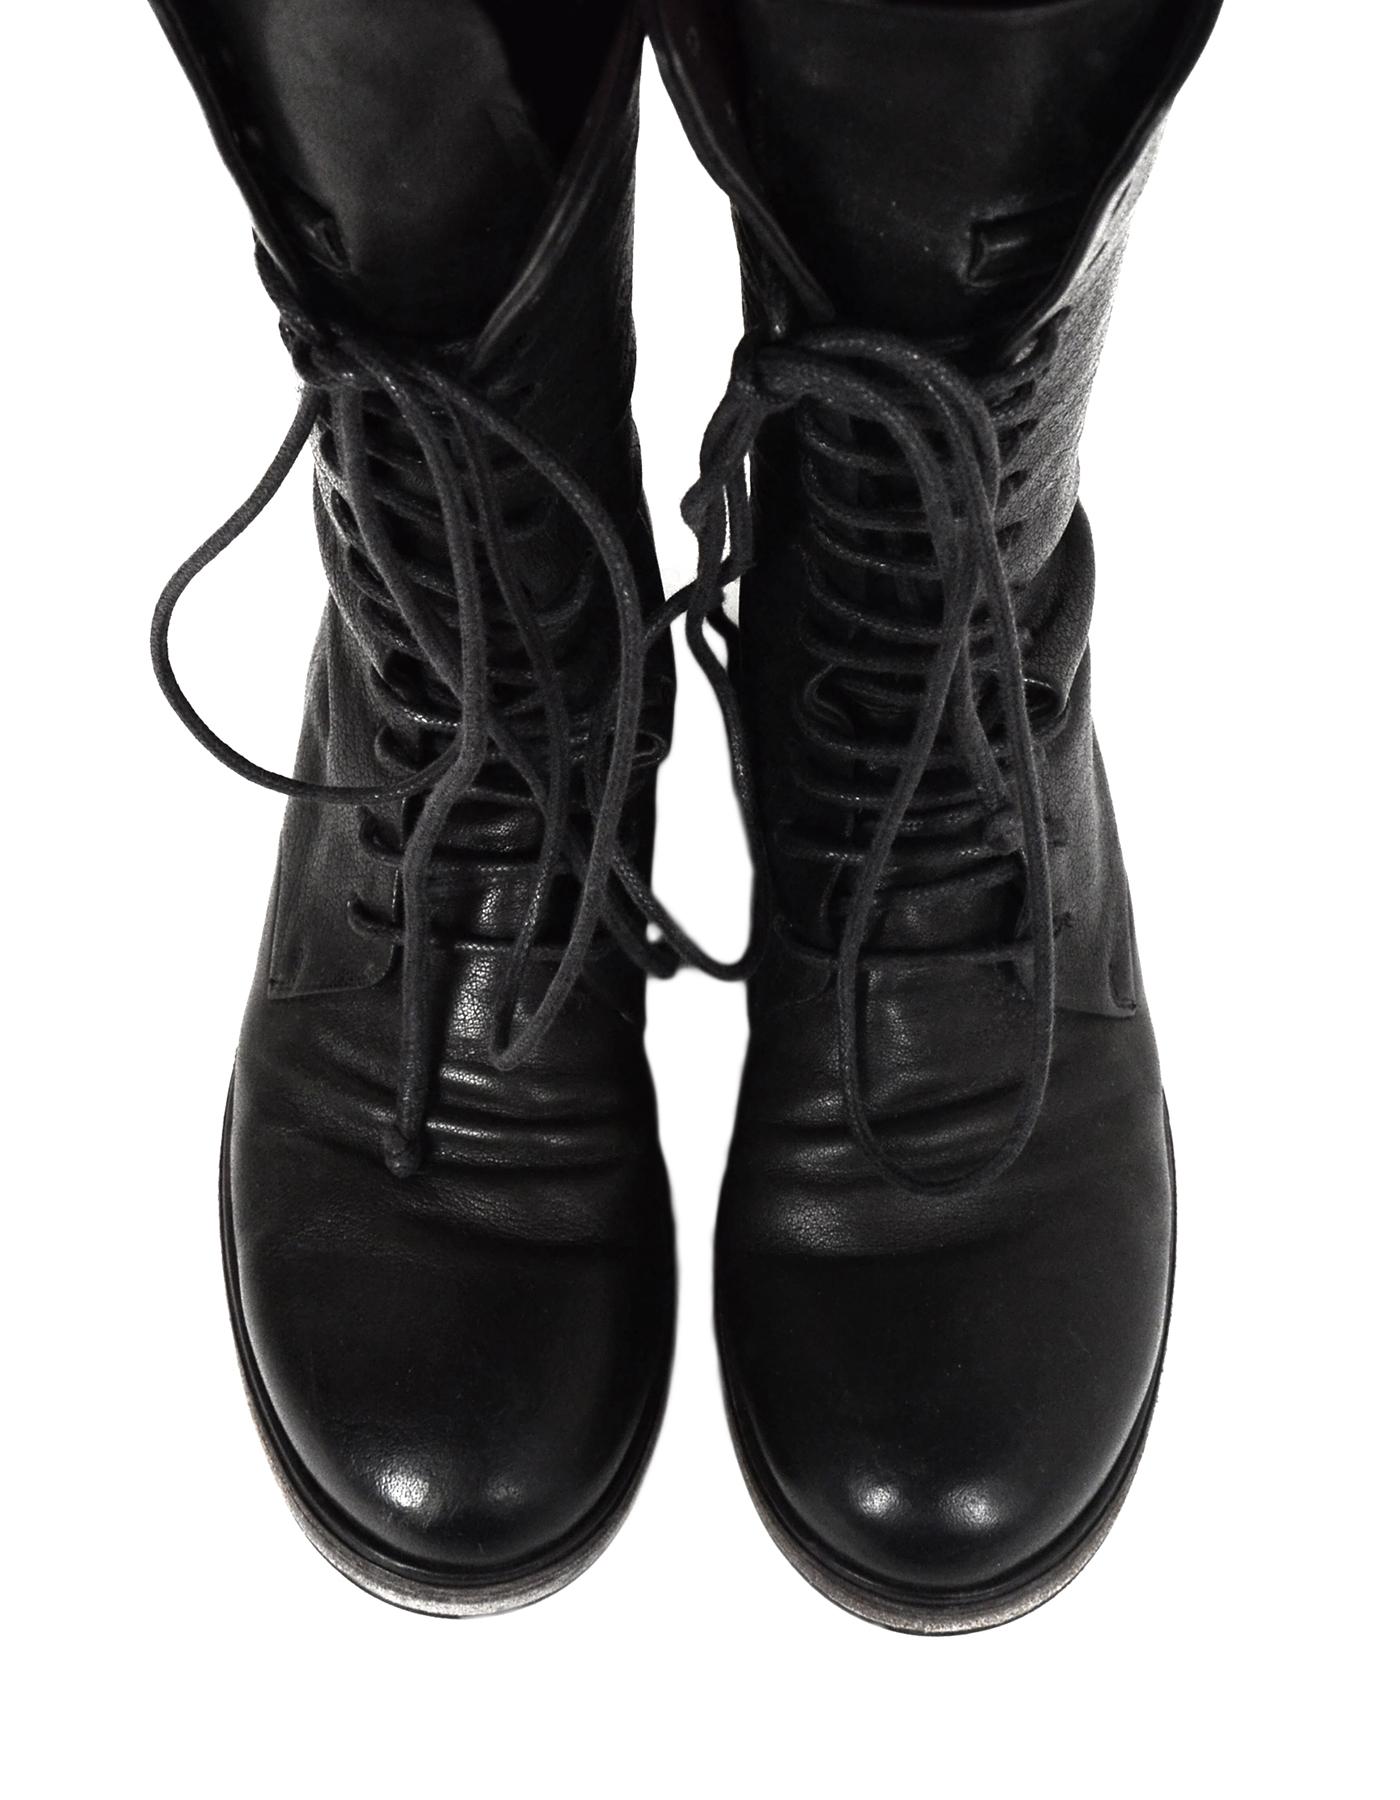 Marsell Black Leather Tall Lace Up Combat Boots Sz 37.5 3